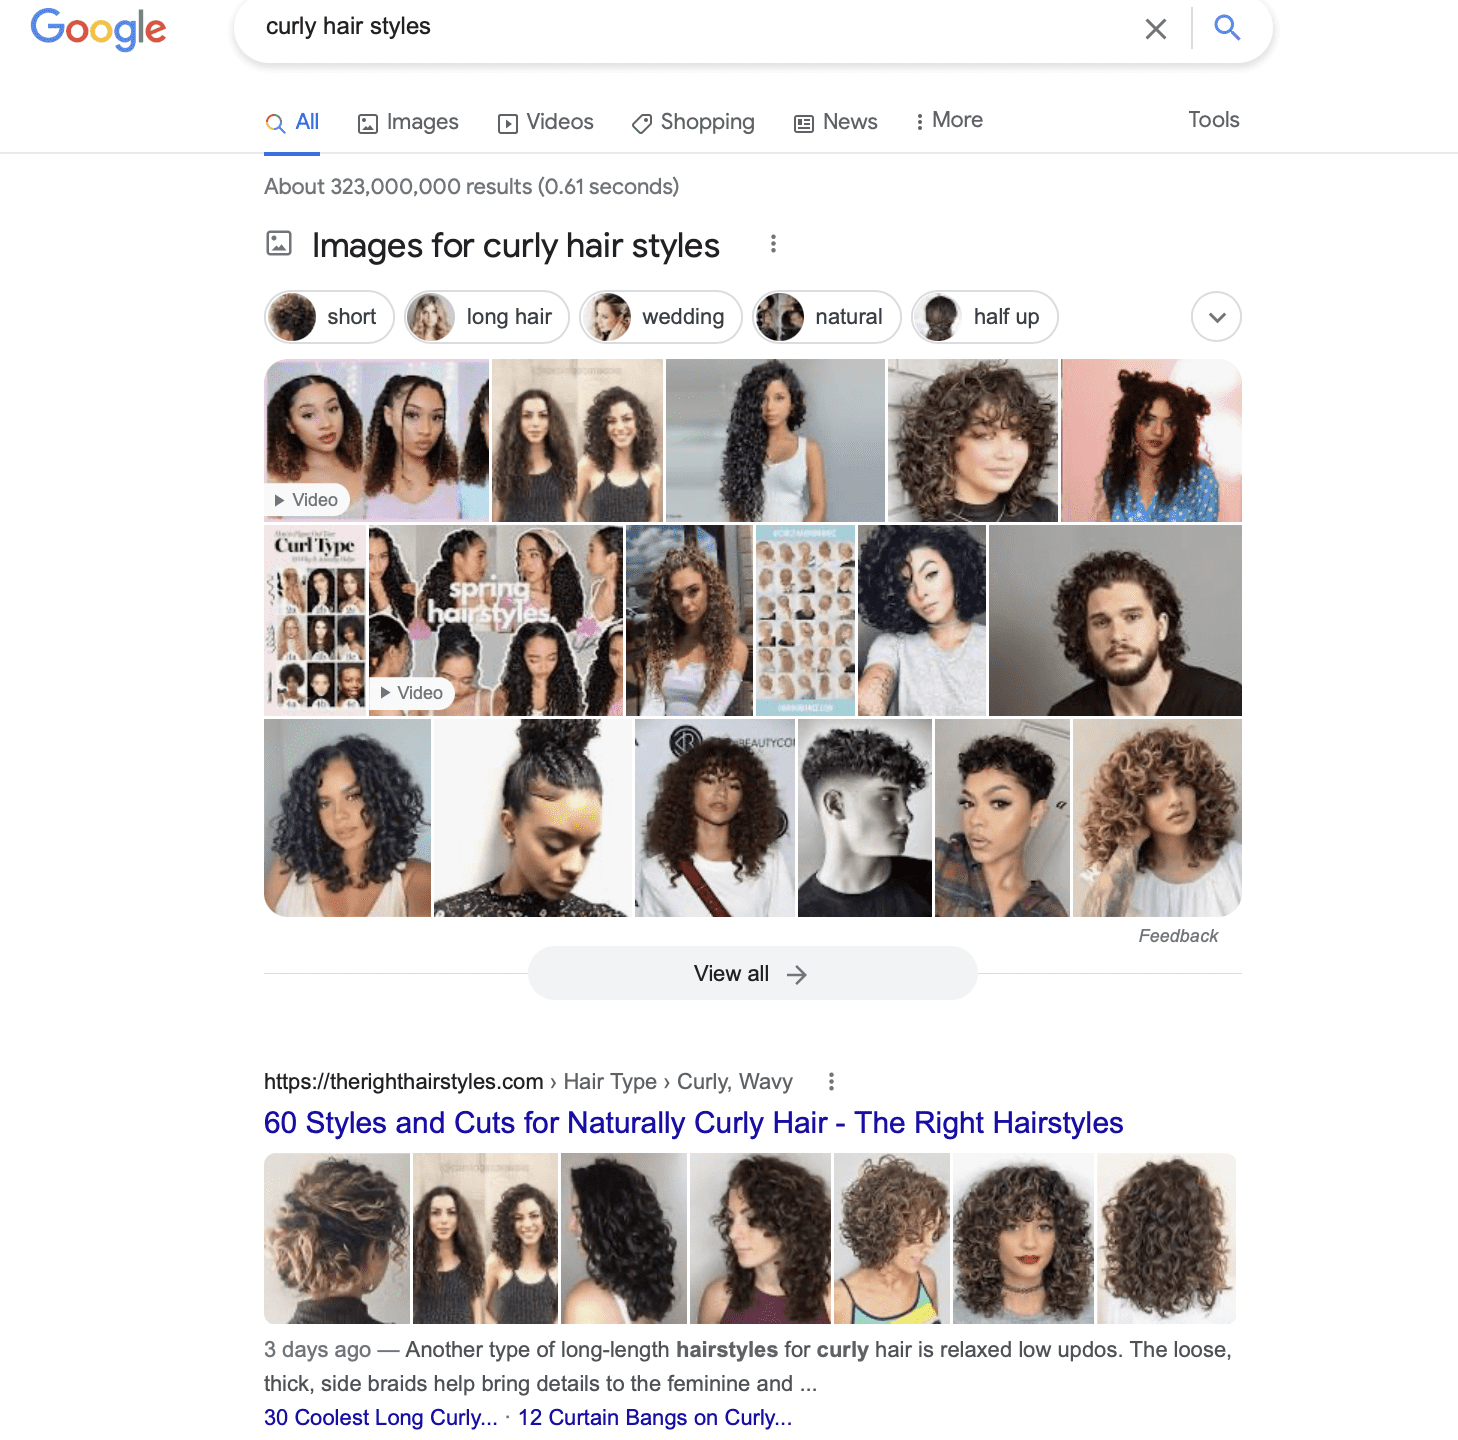 informational google search for "curly hair styles"